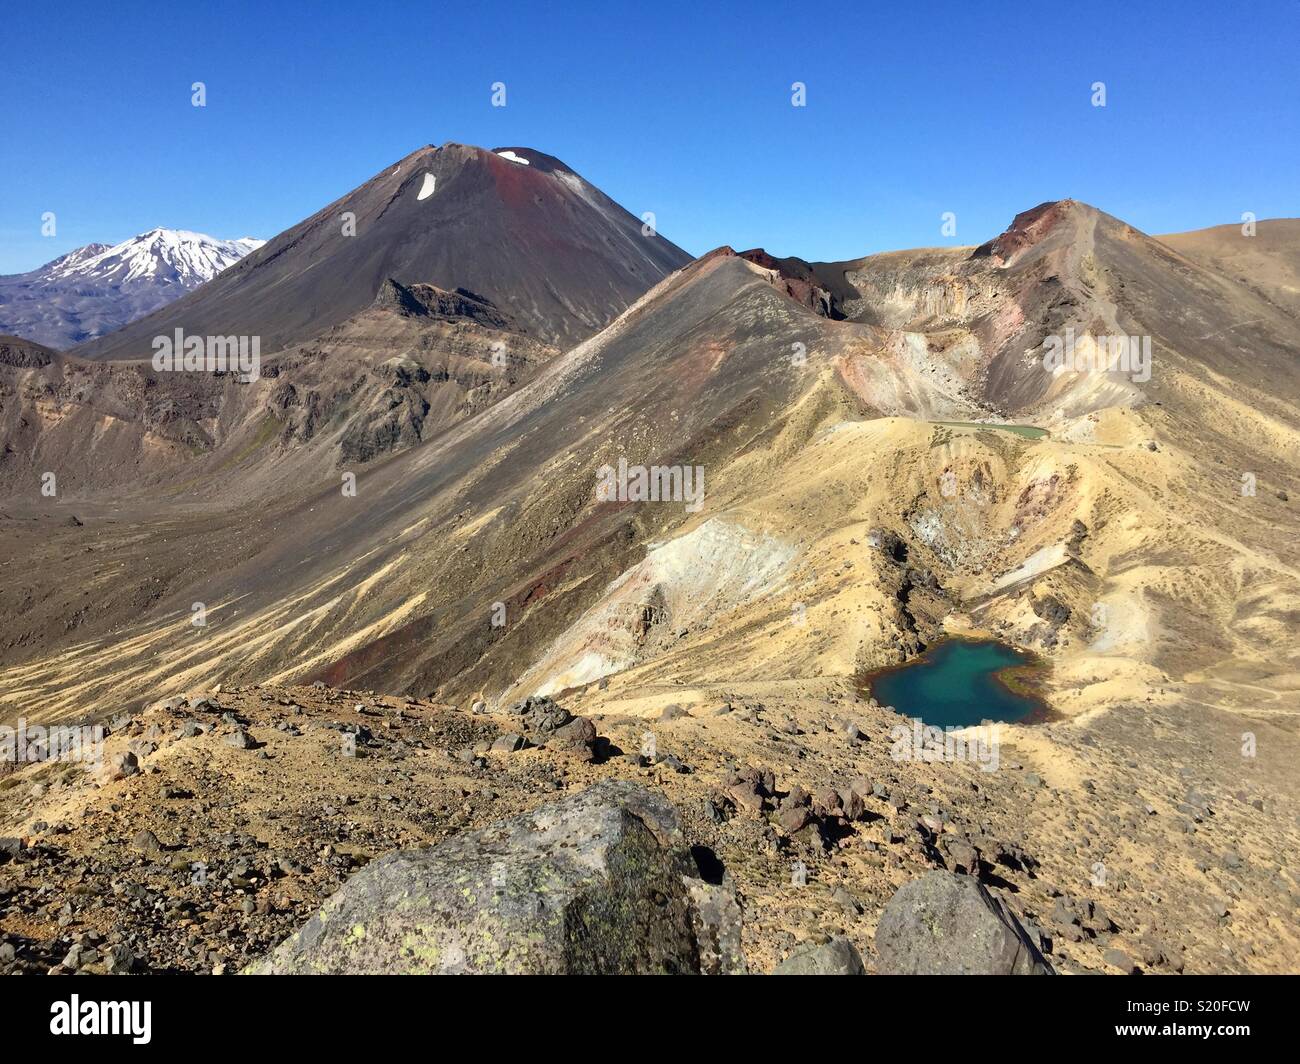 Early Summer Hiking Along Lord of the Rings Volcano Mt. Doom Stock Photo